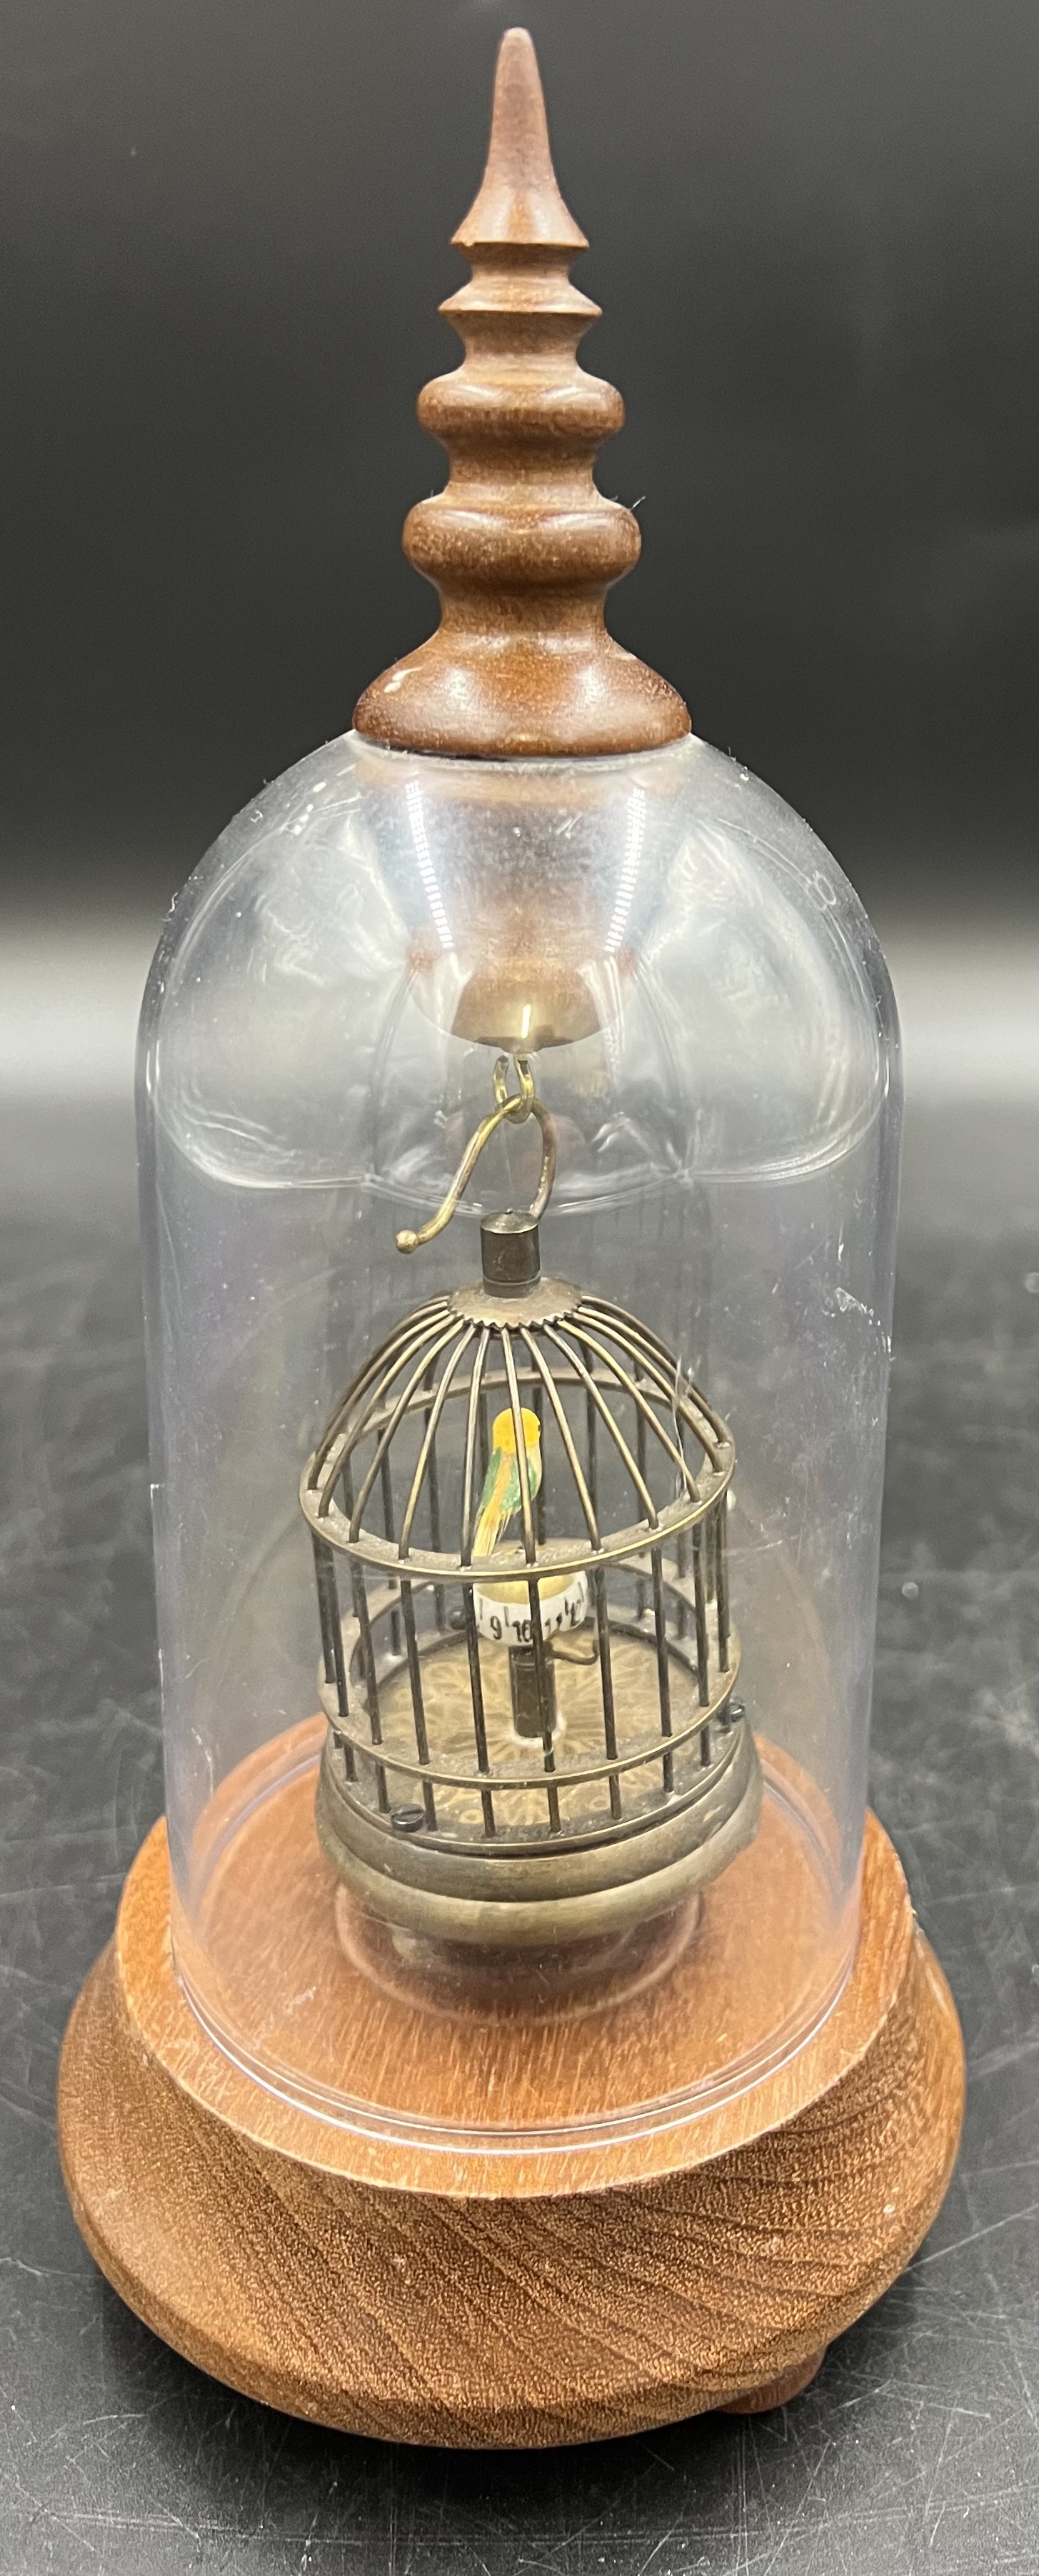 A novelty clock displayed under a clear dome on a wooden base. The vintage style metal birdcage - Image 4 of 4